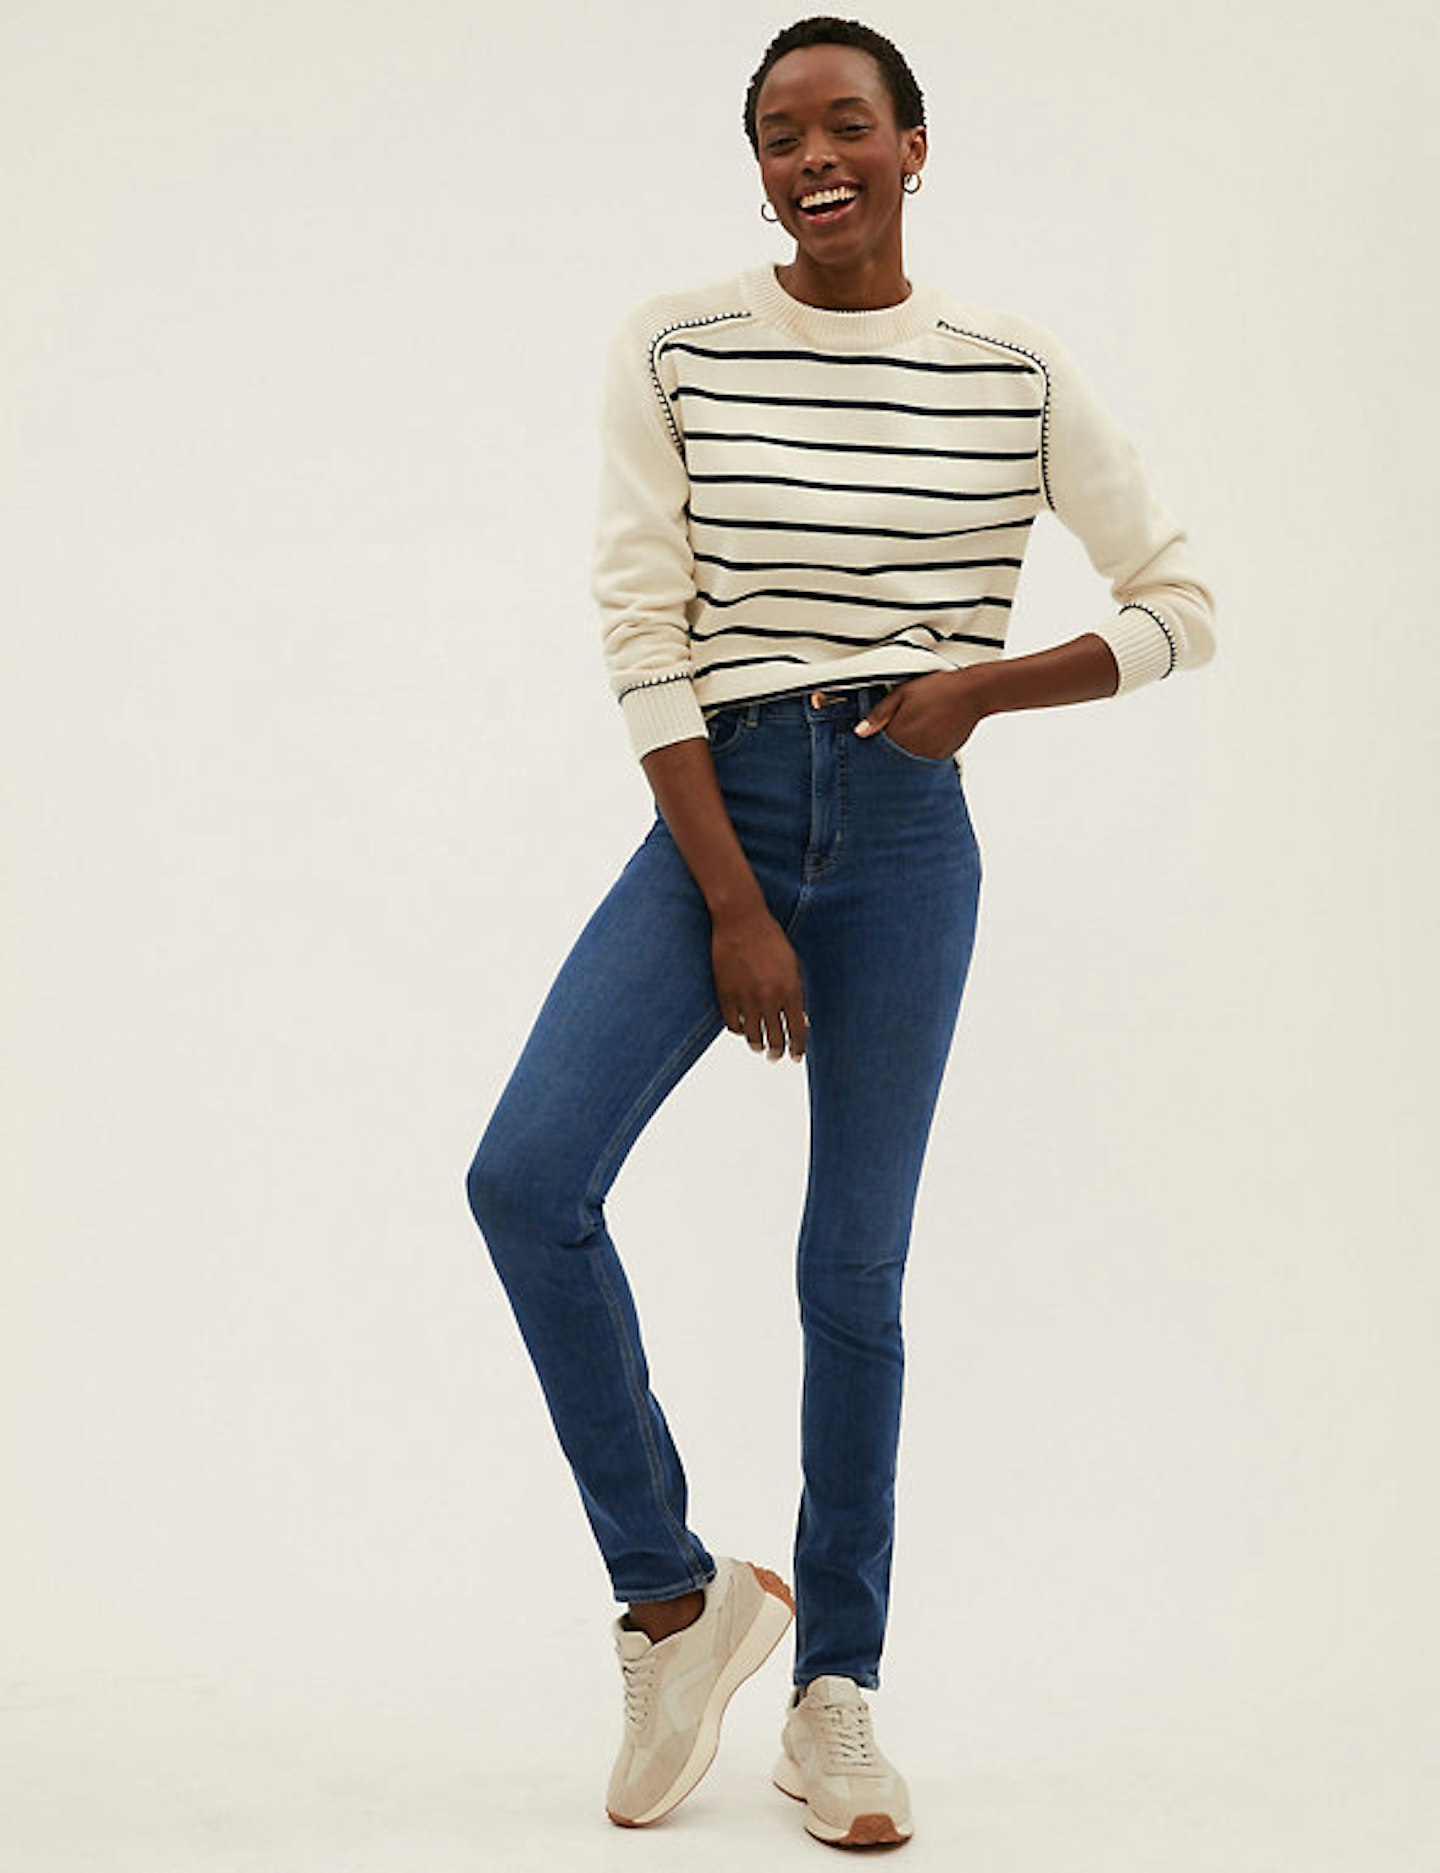 M&S new 'magic' shaping jeans flatter any figure